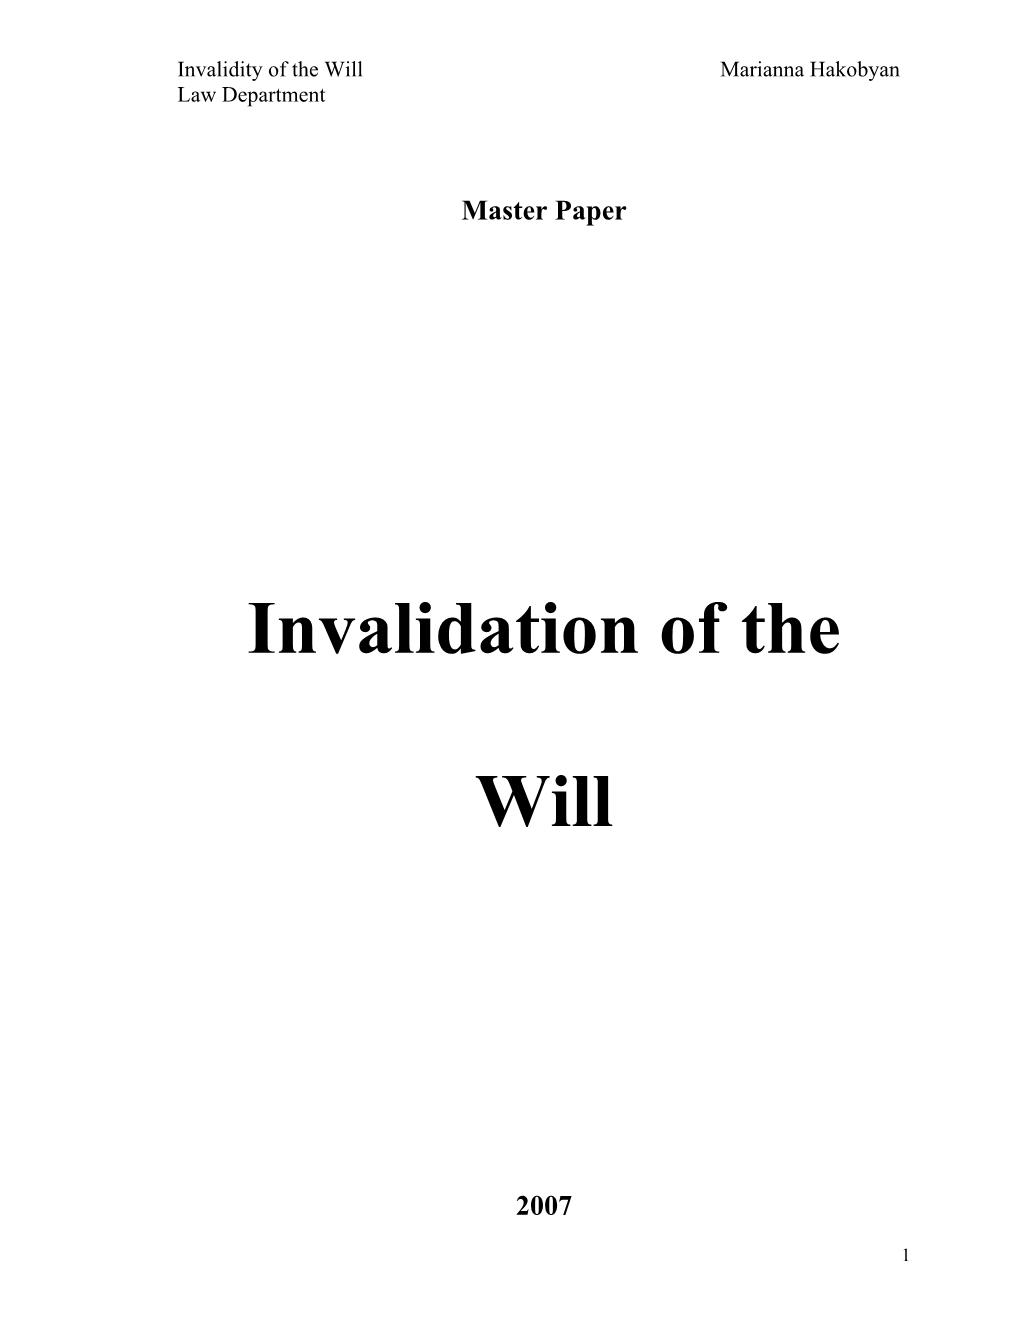 Invalidation of the Will